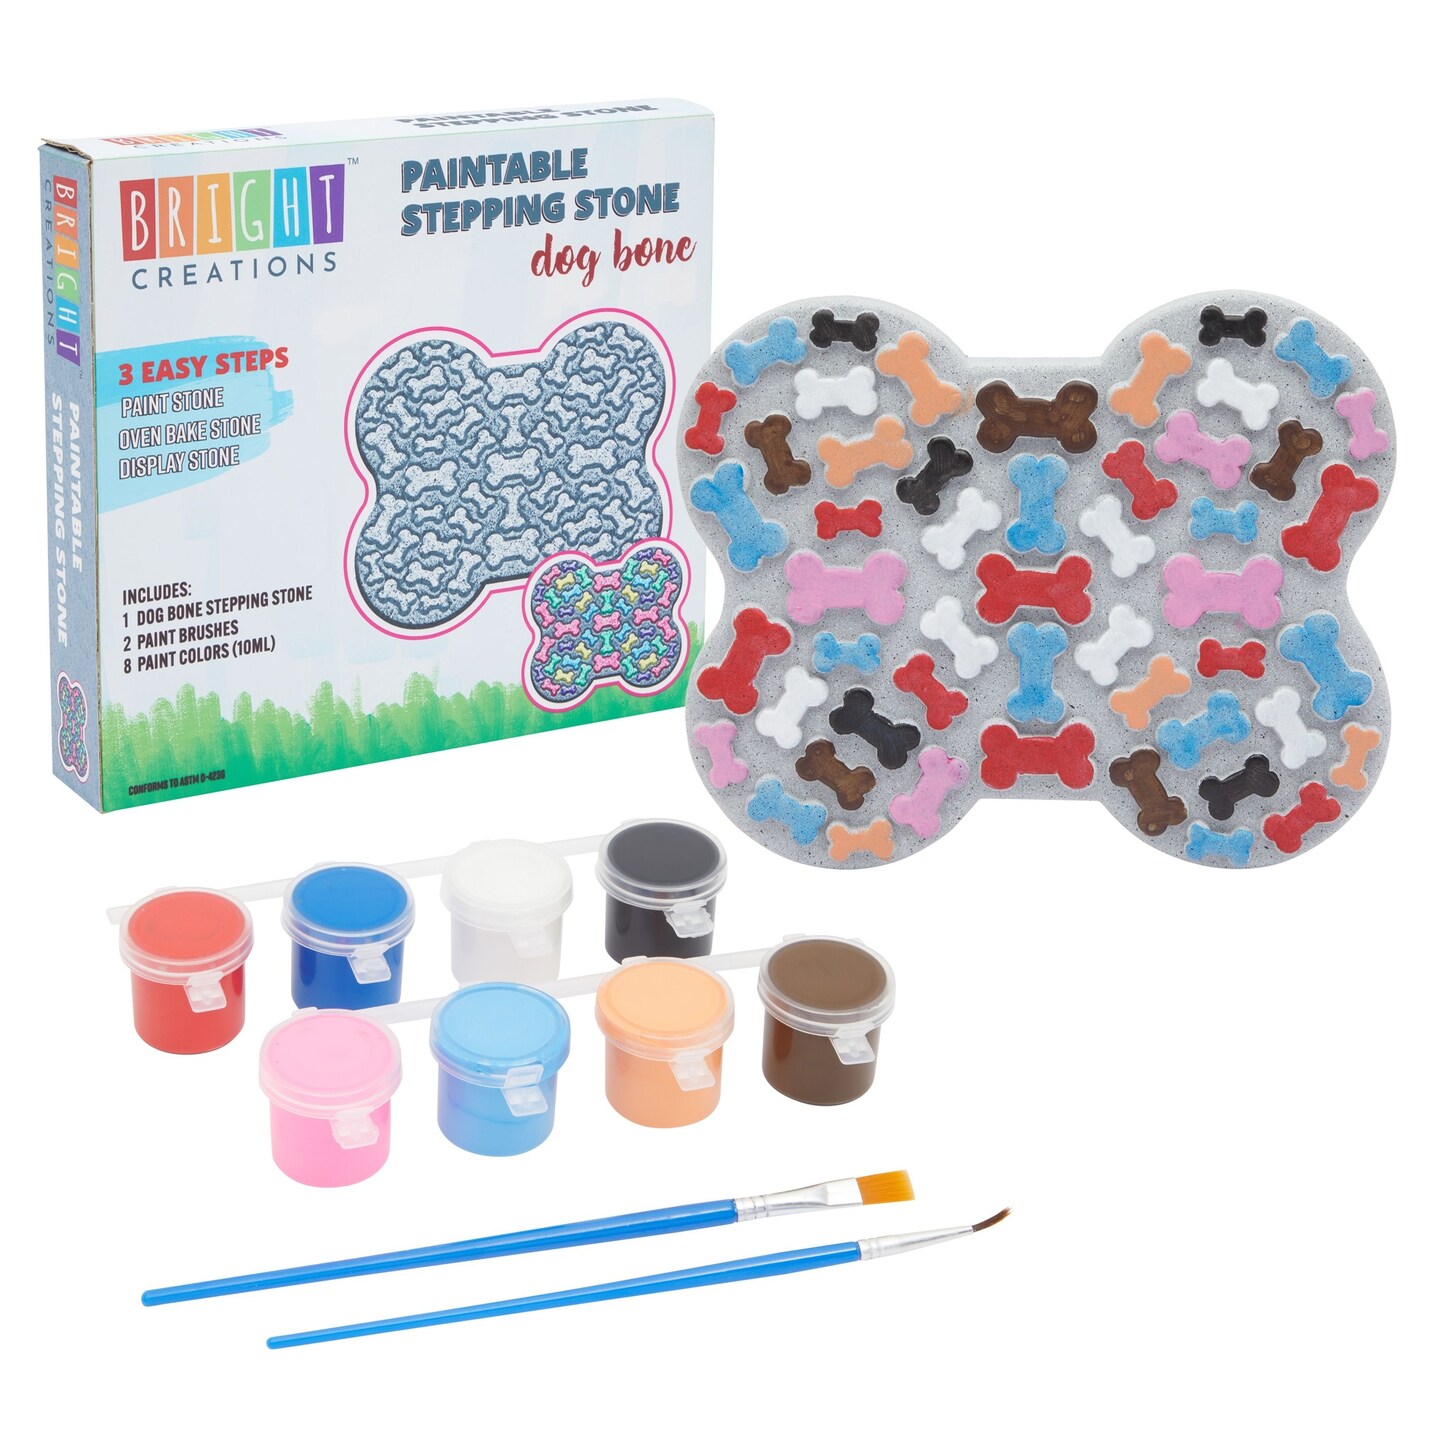 Wholesale Paint Your Own Steppingstone Kits - DollarDays